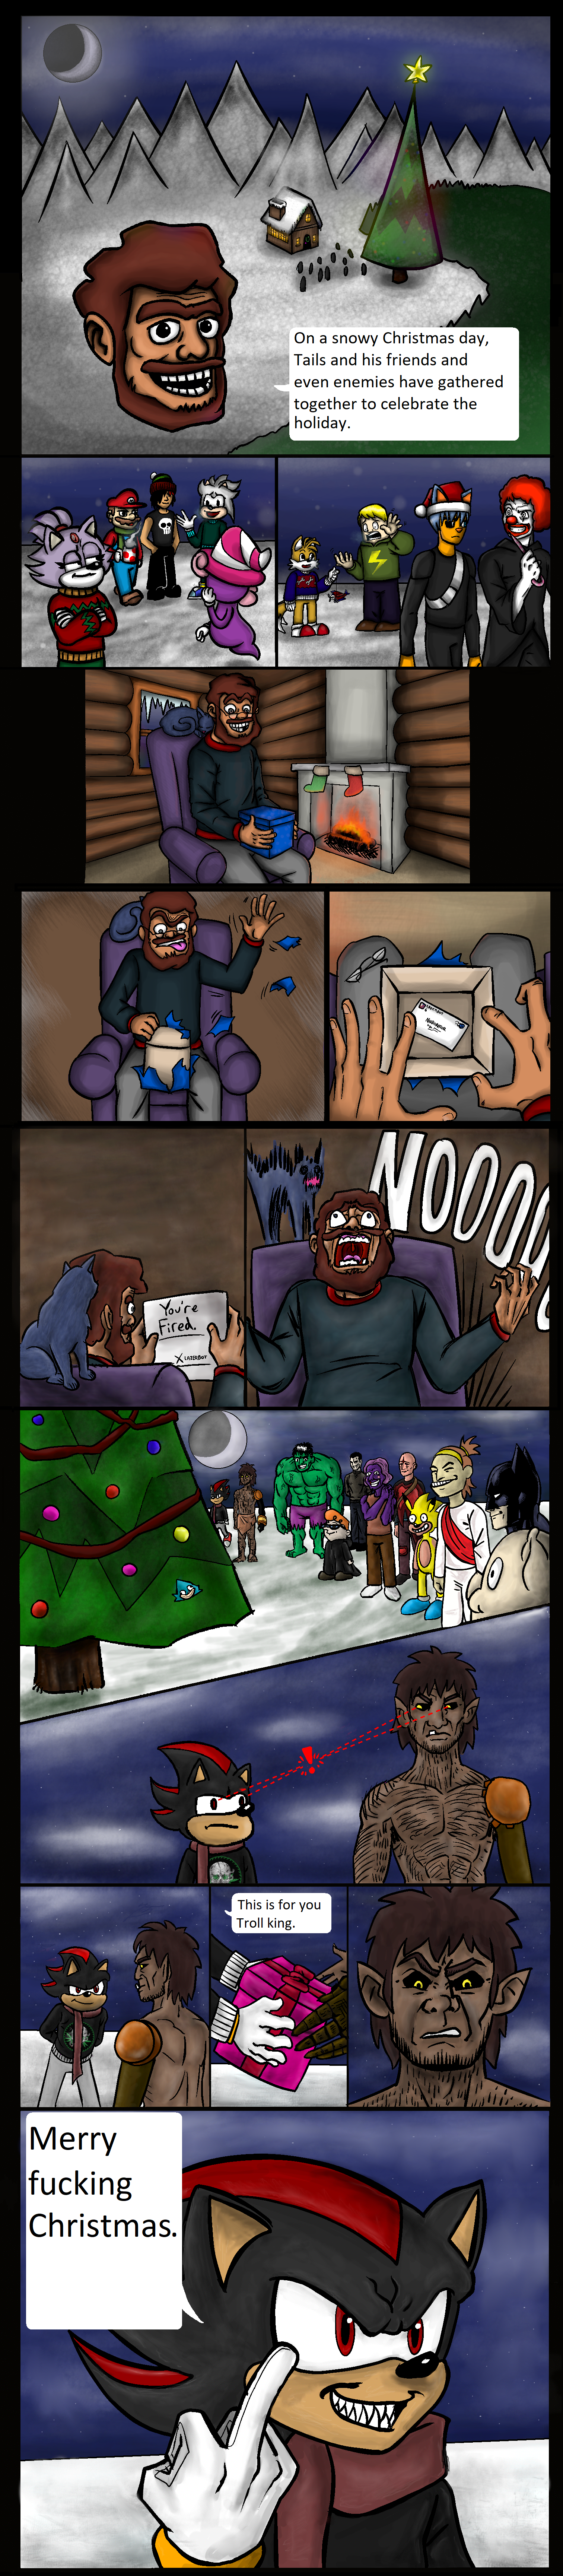 xmas/pg1.png. If you're seeing this, enable images. Or, perhaps we have a website issue. Try refreshing, if unsuccessful email c@commodorian.org with a detailed description of how you got here.